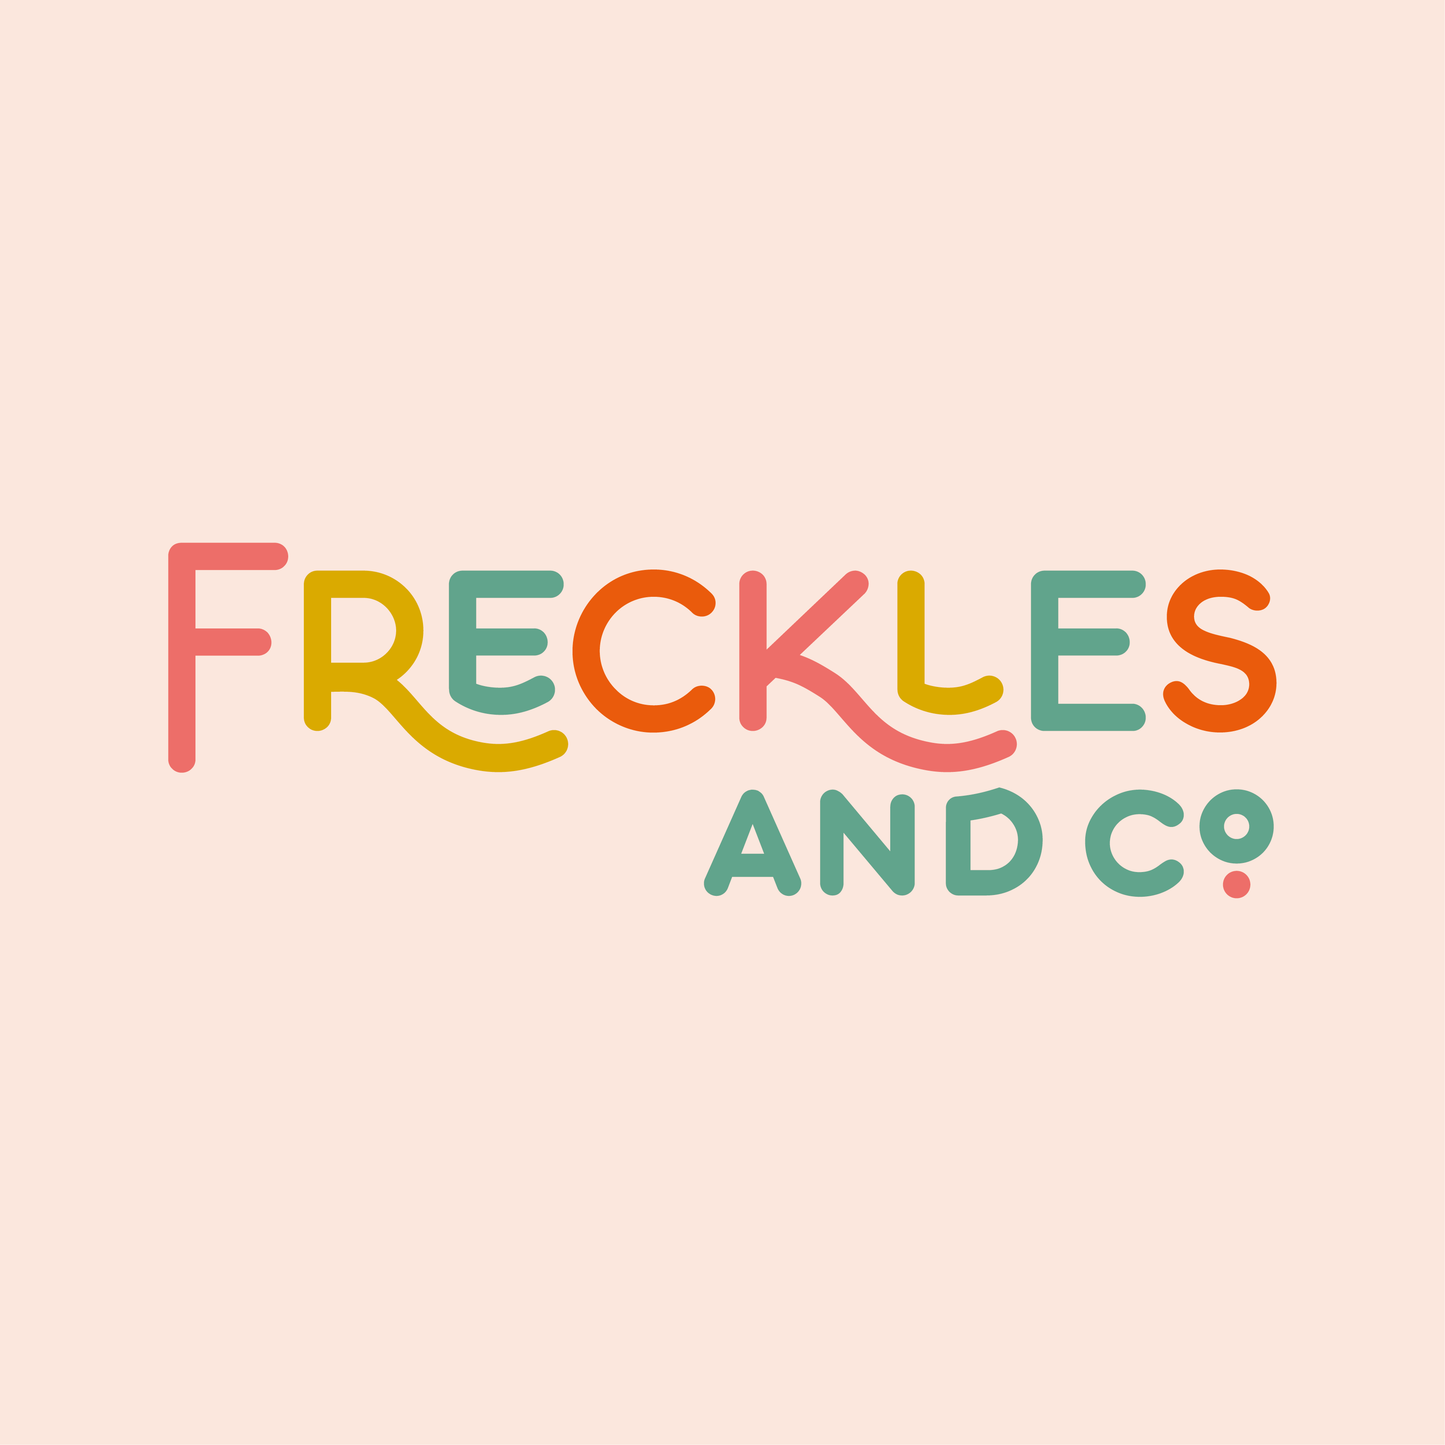 Freckles and Co Sewing Voucher